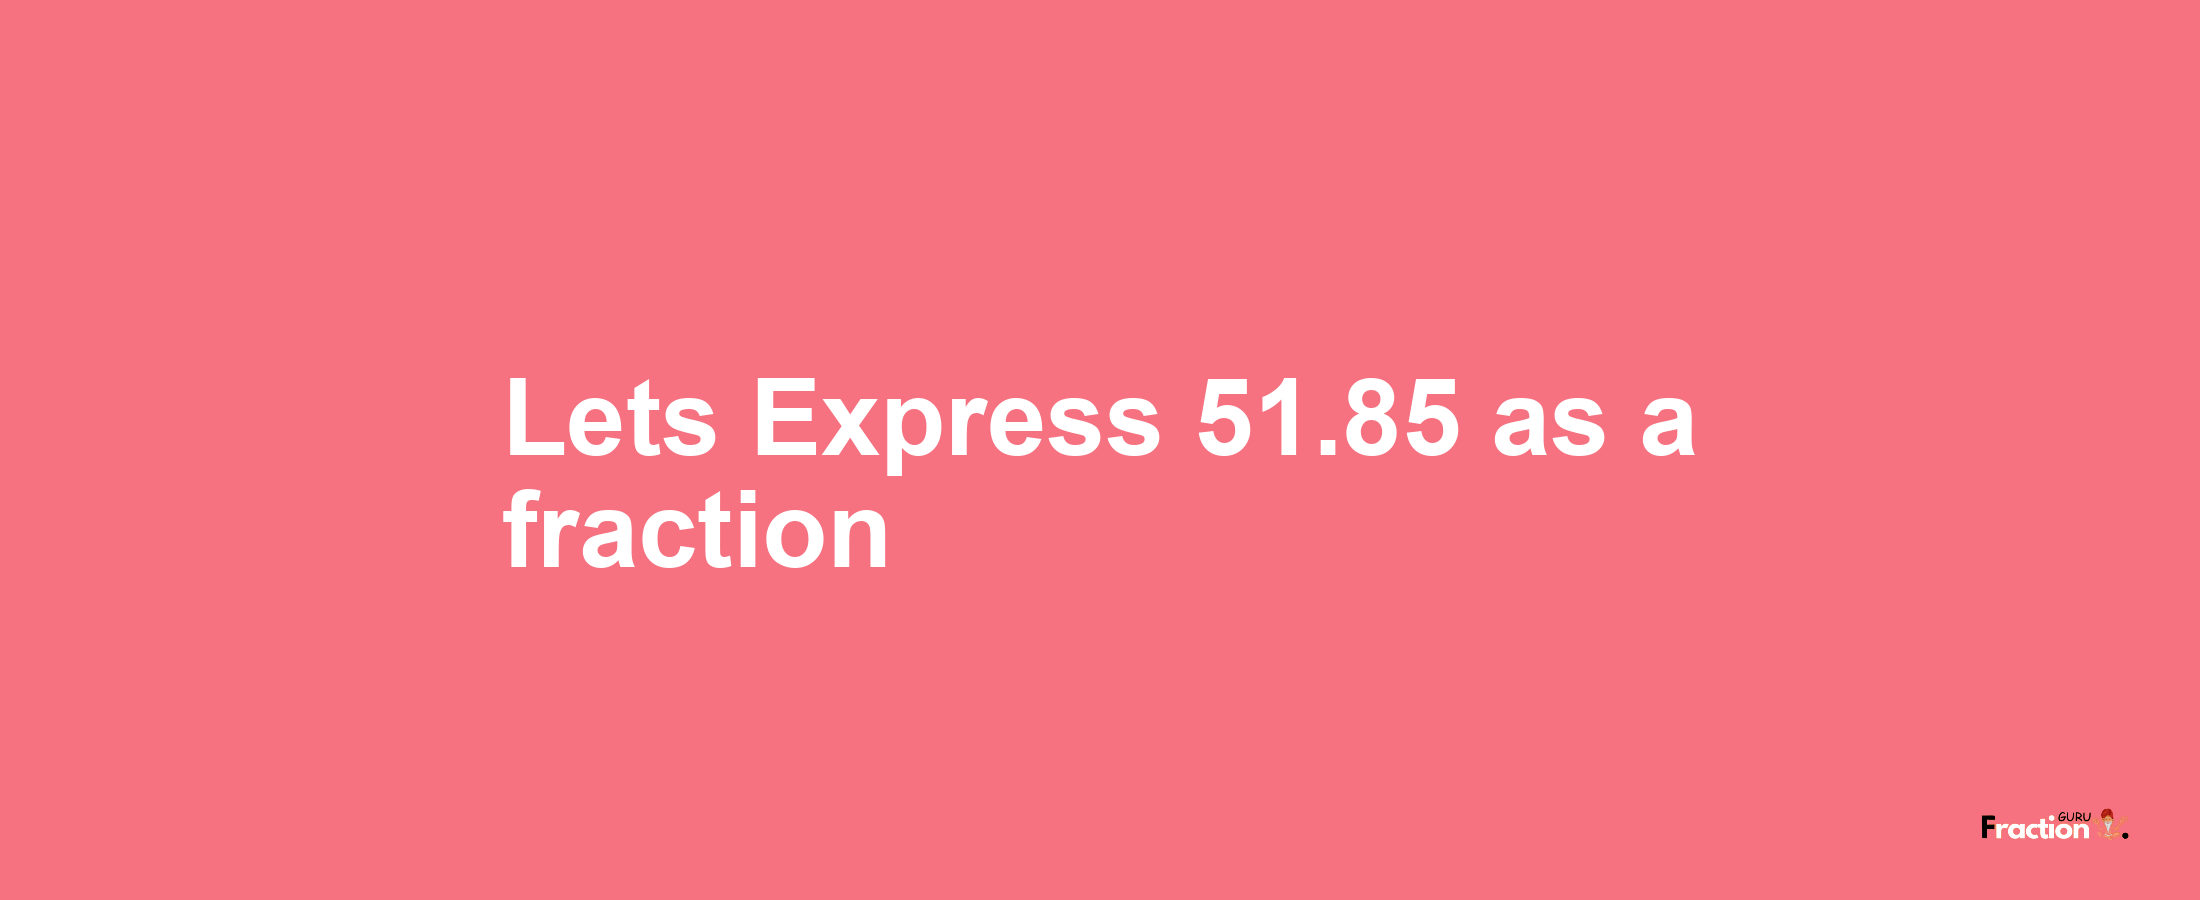 Lets Express 51.85 as afraction